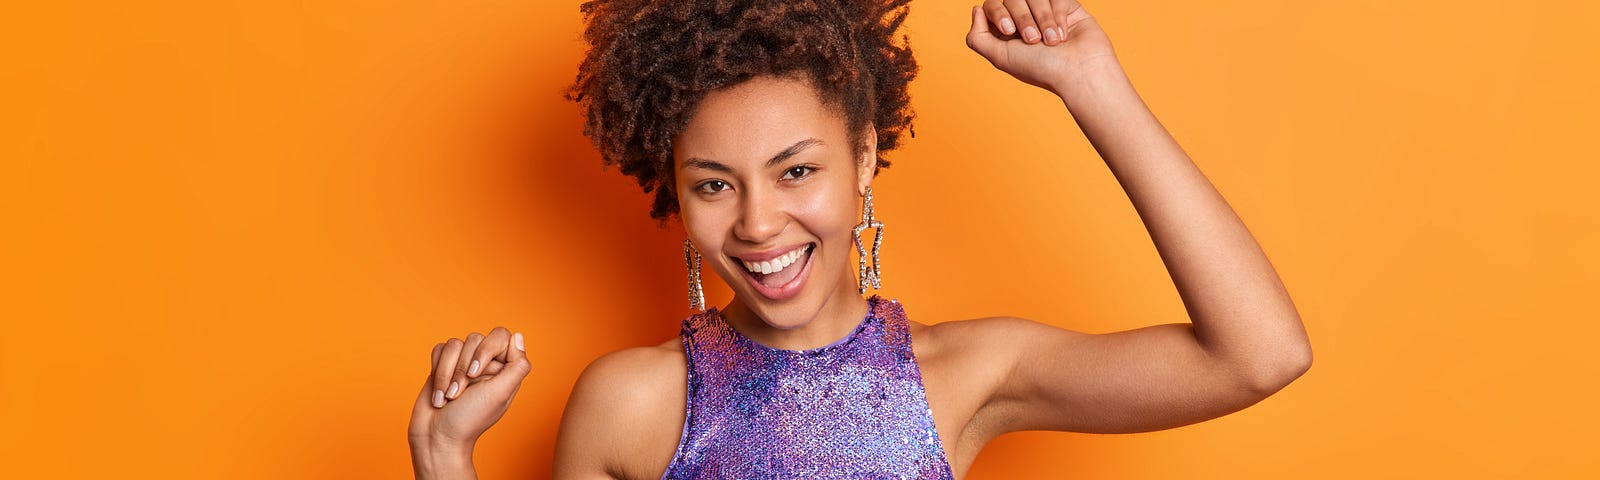 Woman in shiny top dancing and having fun against orange backdrop